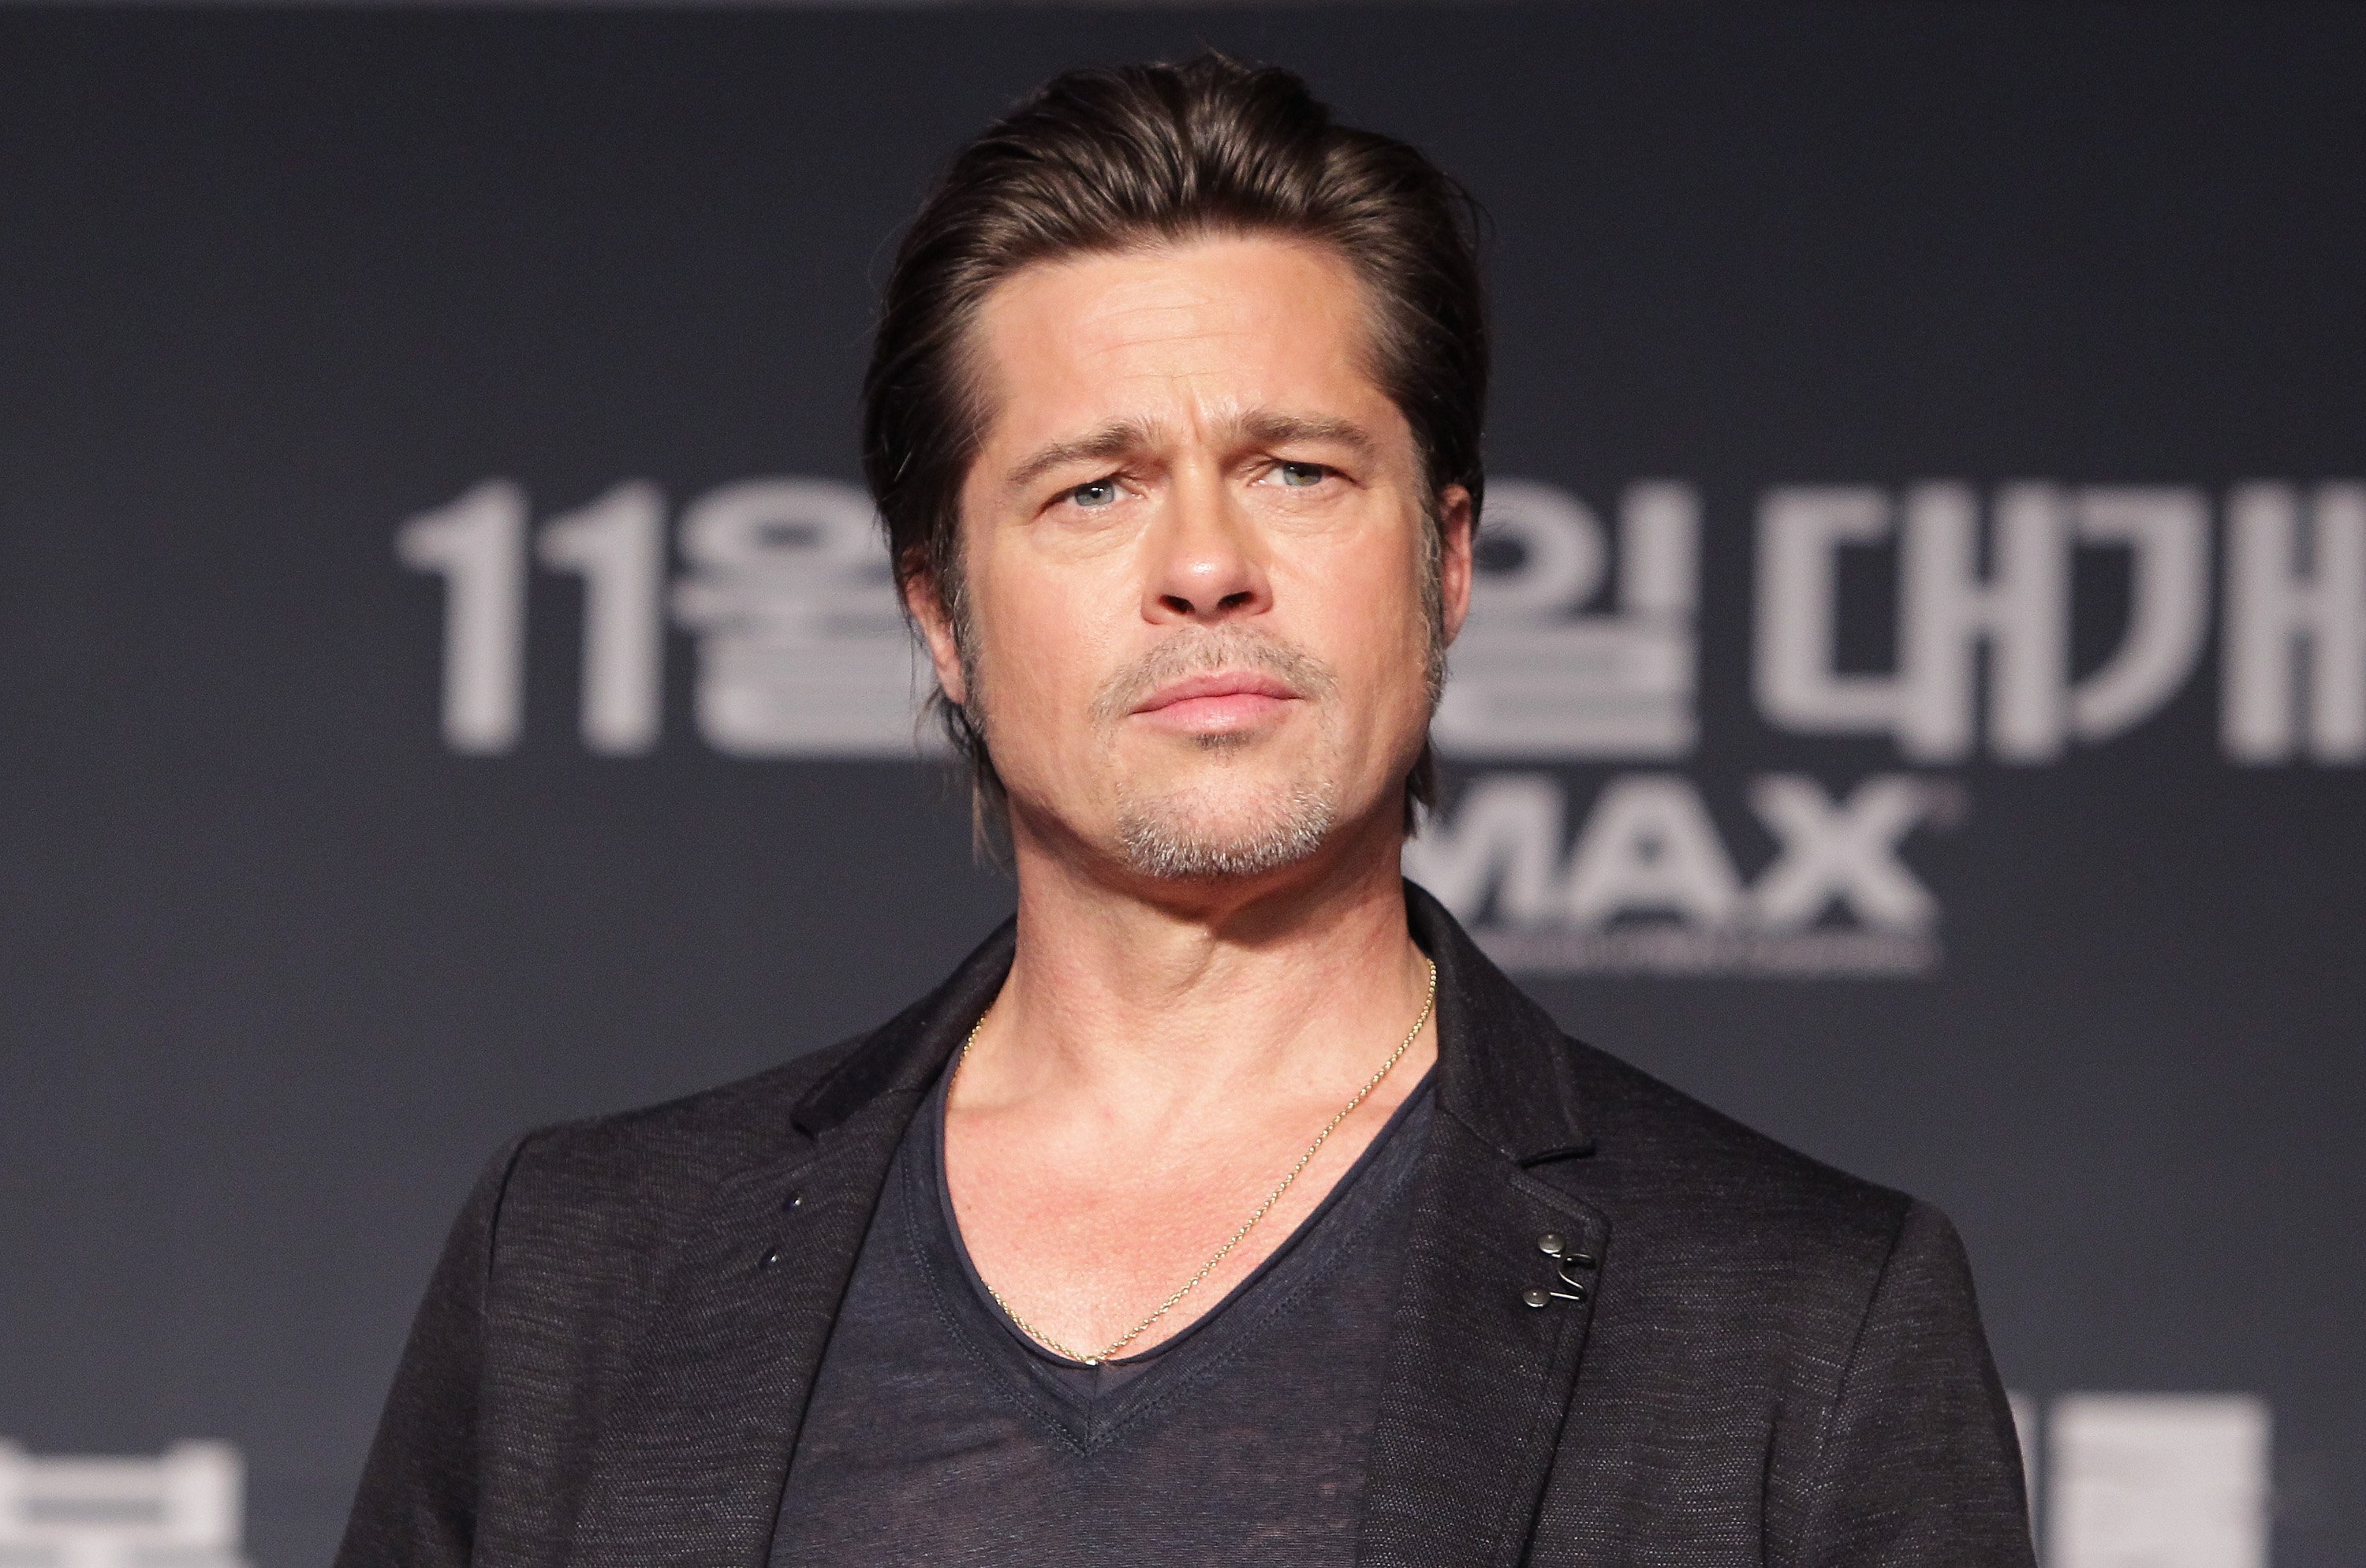 Brad Pitt attends the 'Fury' Press Conference at Conrad Hotel on November 13, 2014 in Seoul, South Korea | Photo: Getty Images